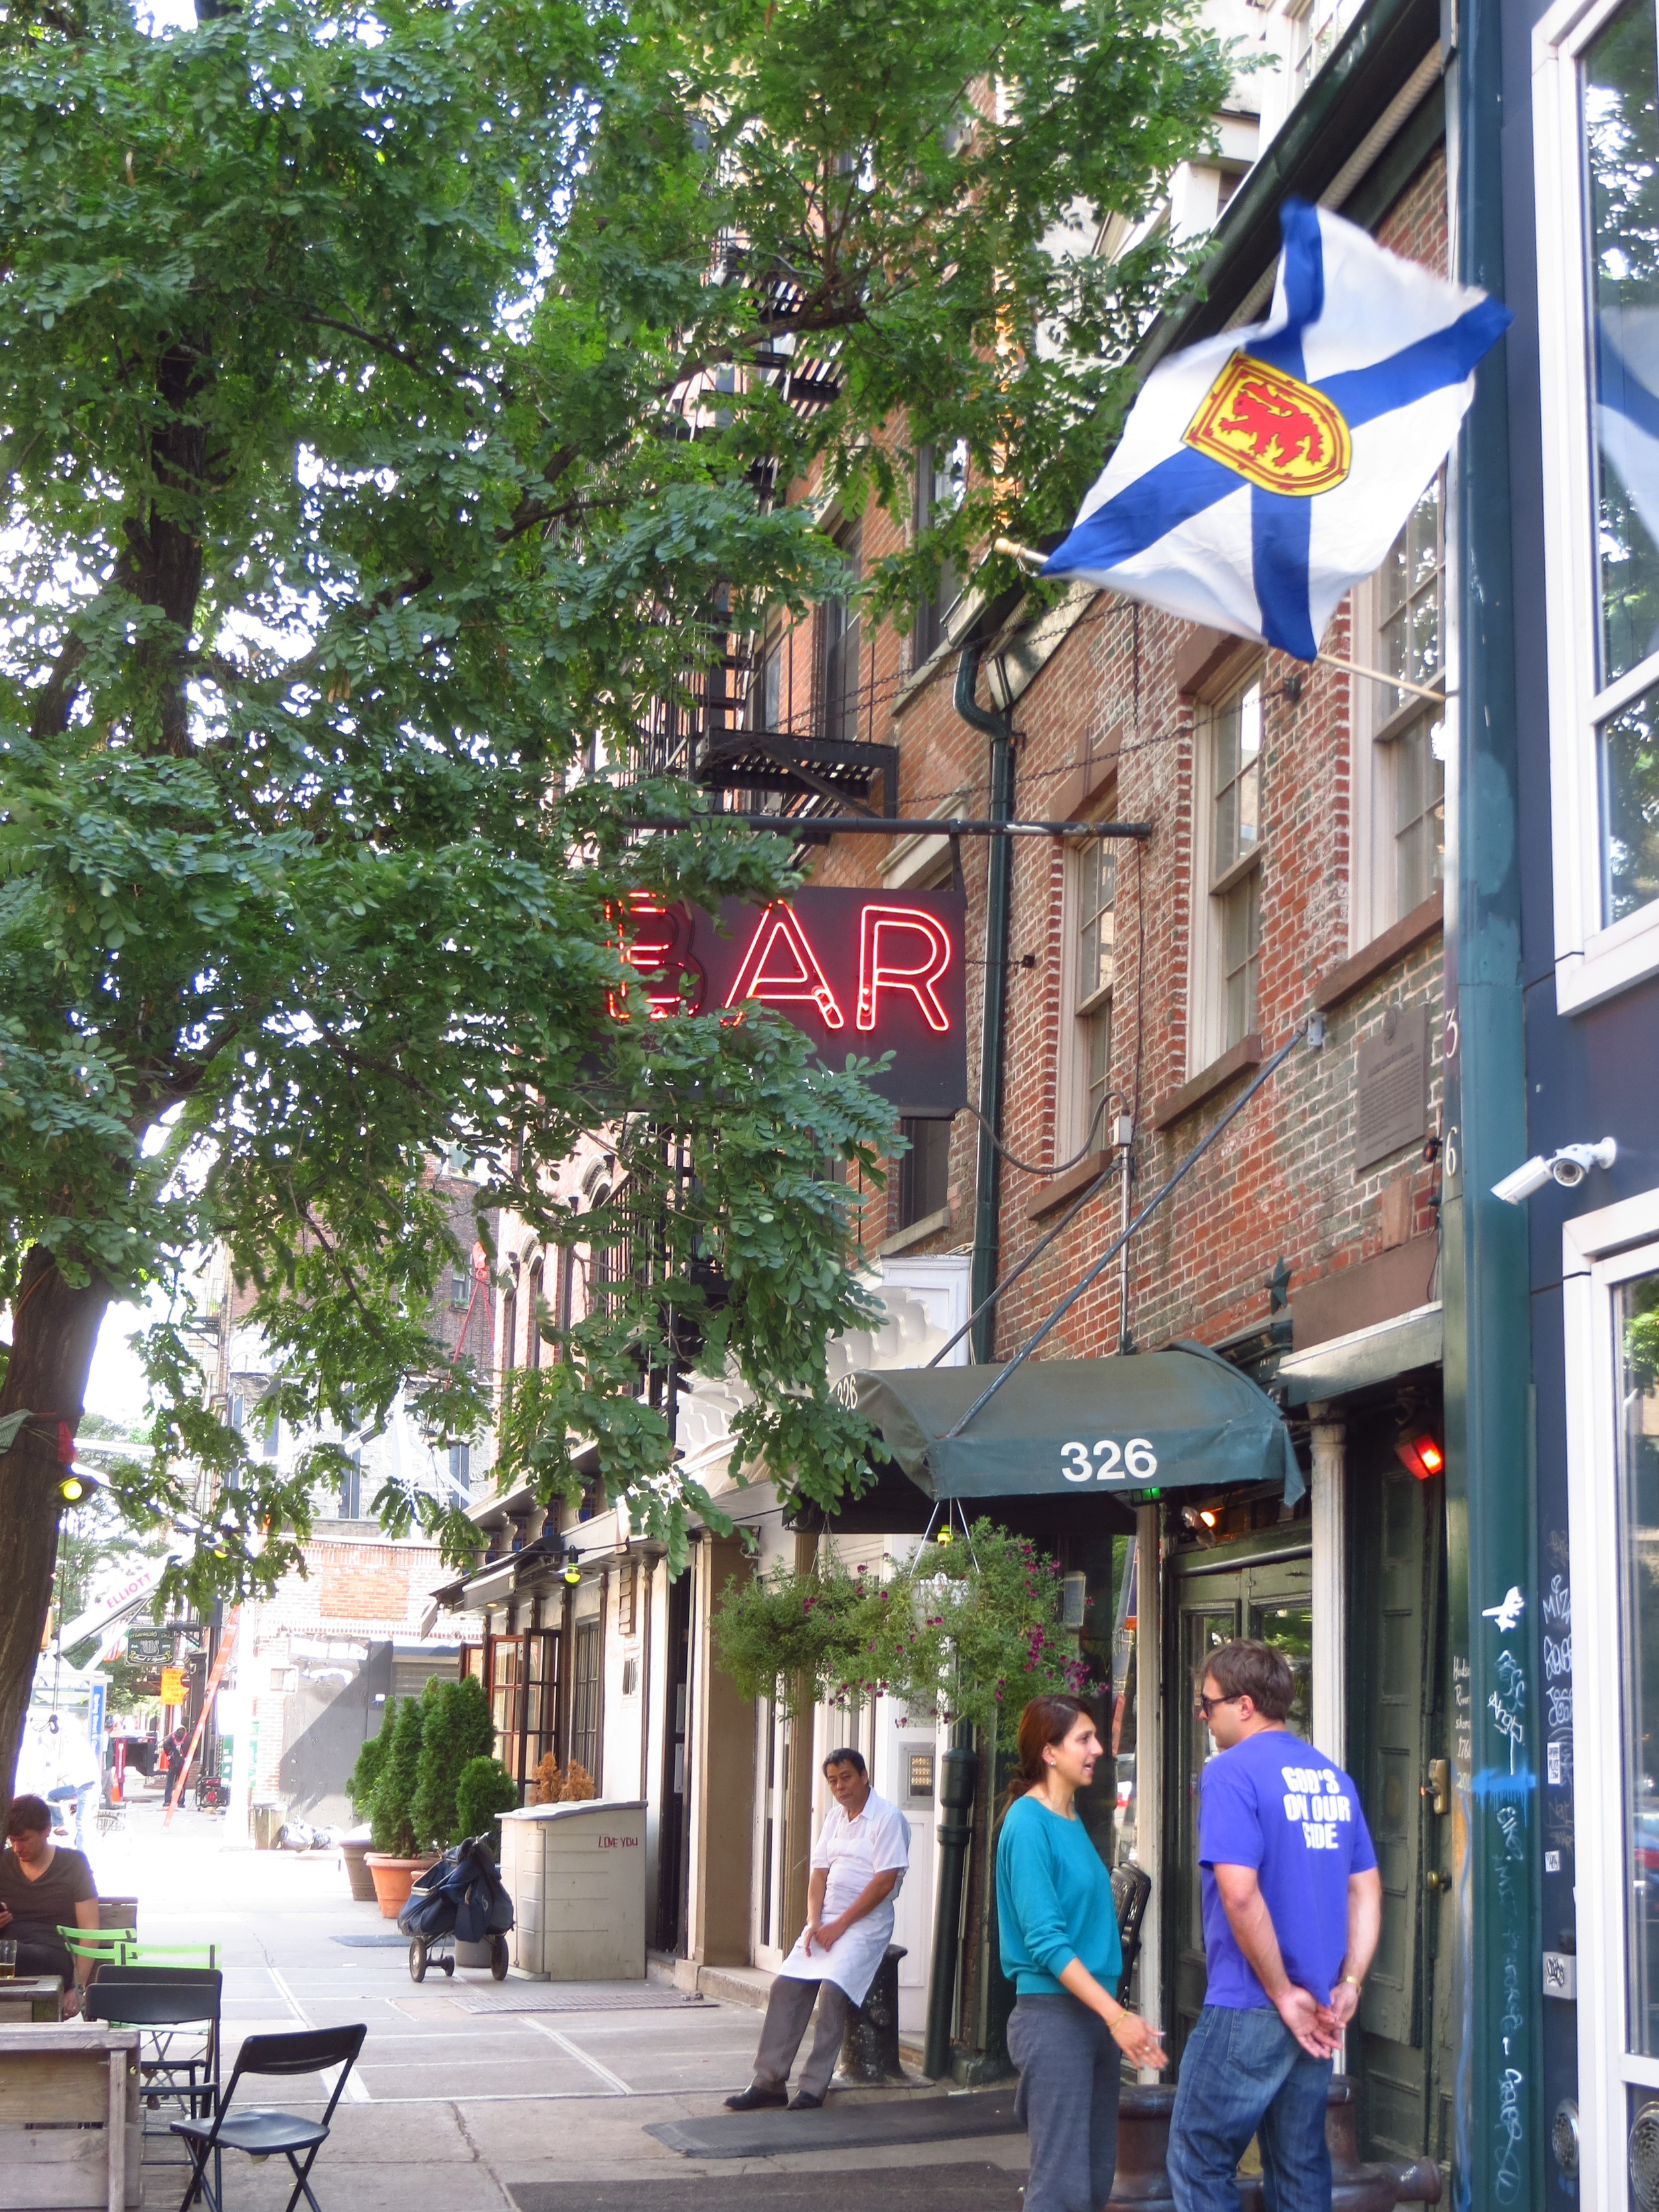 Ear Inn (b.1817 - another "oldest bar in NY" contender)